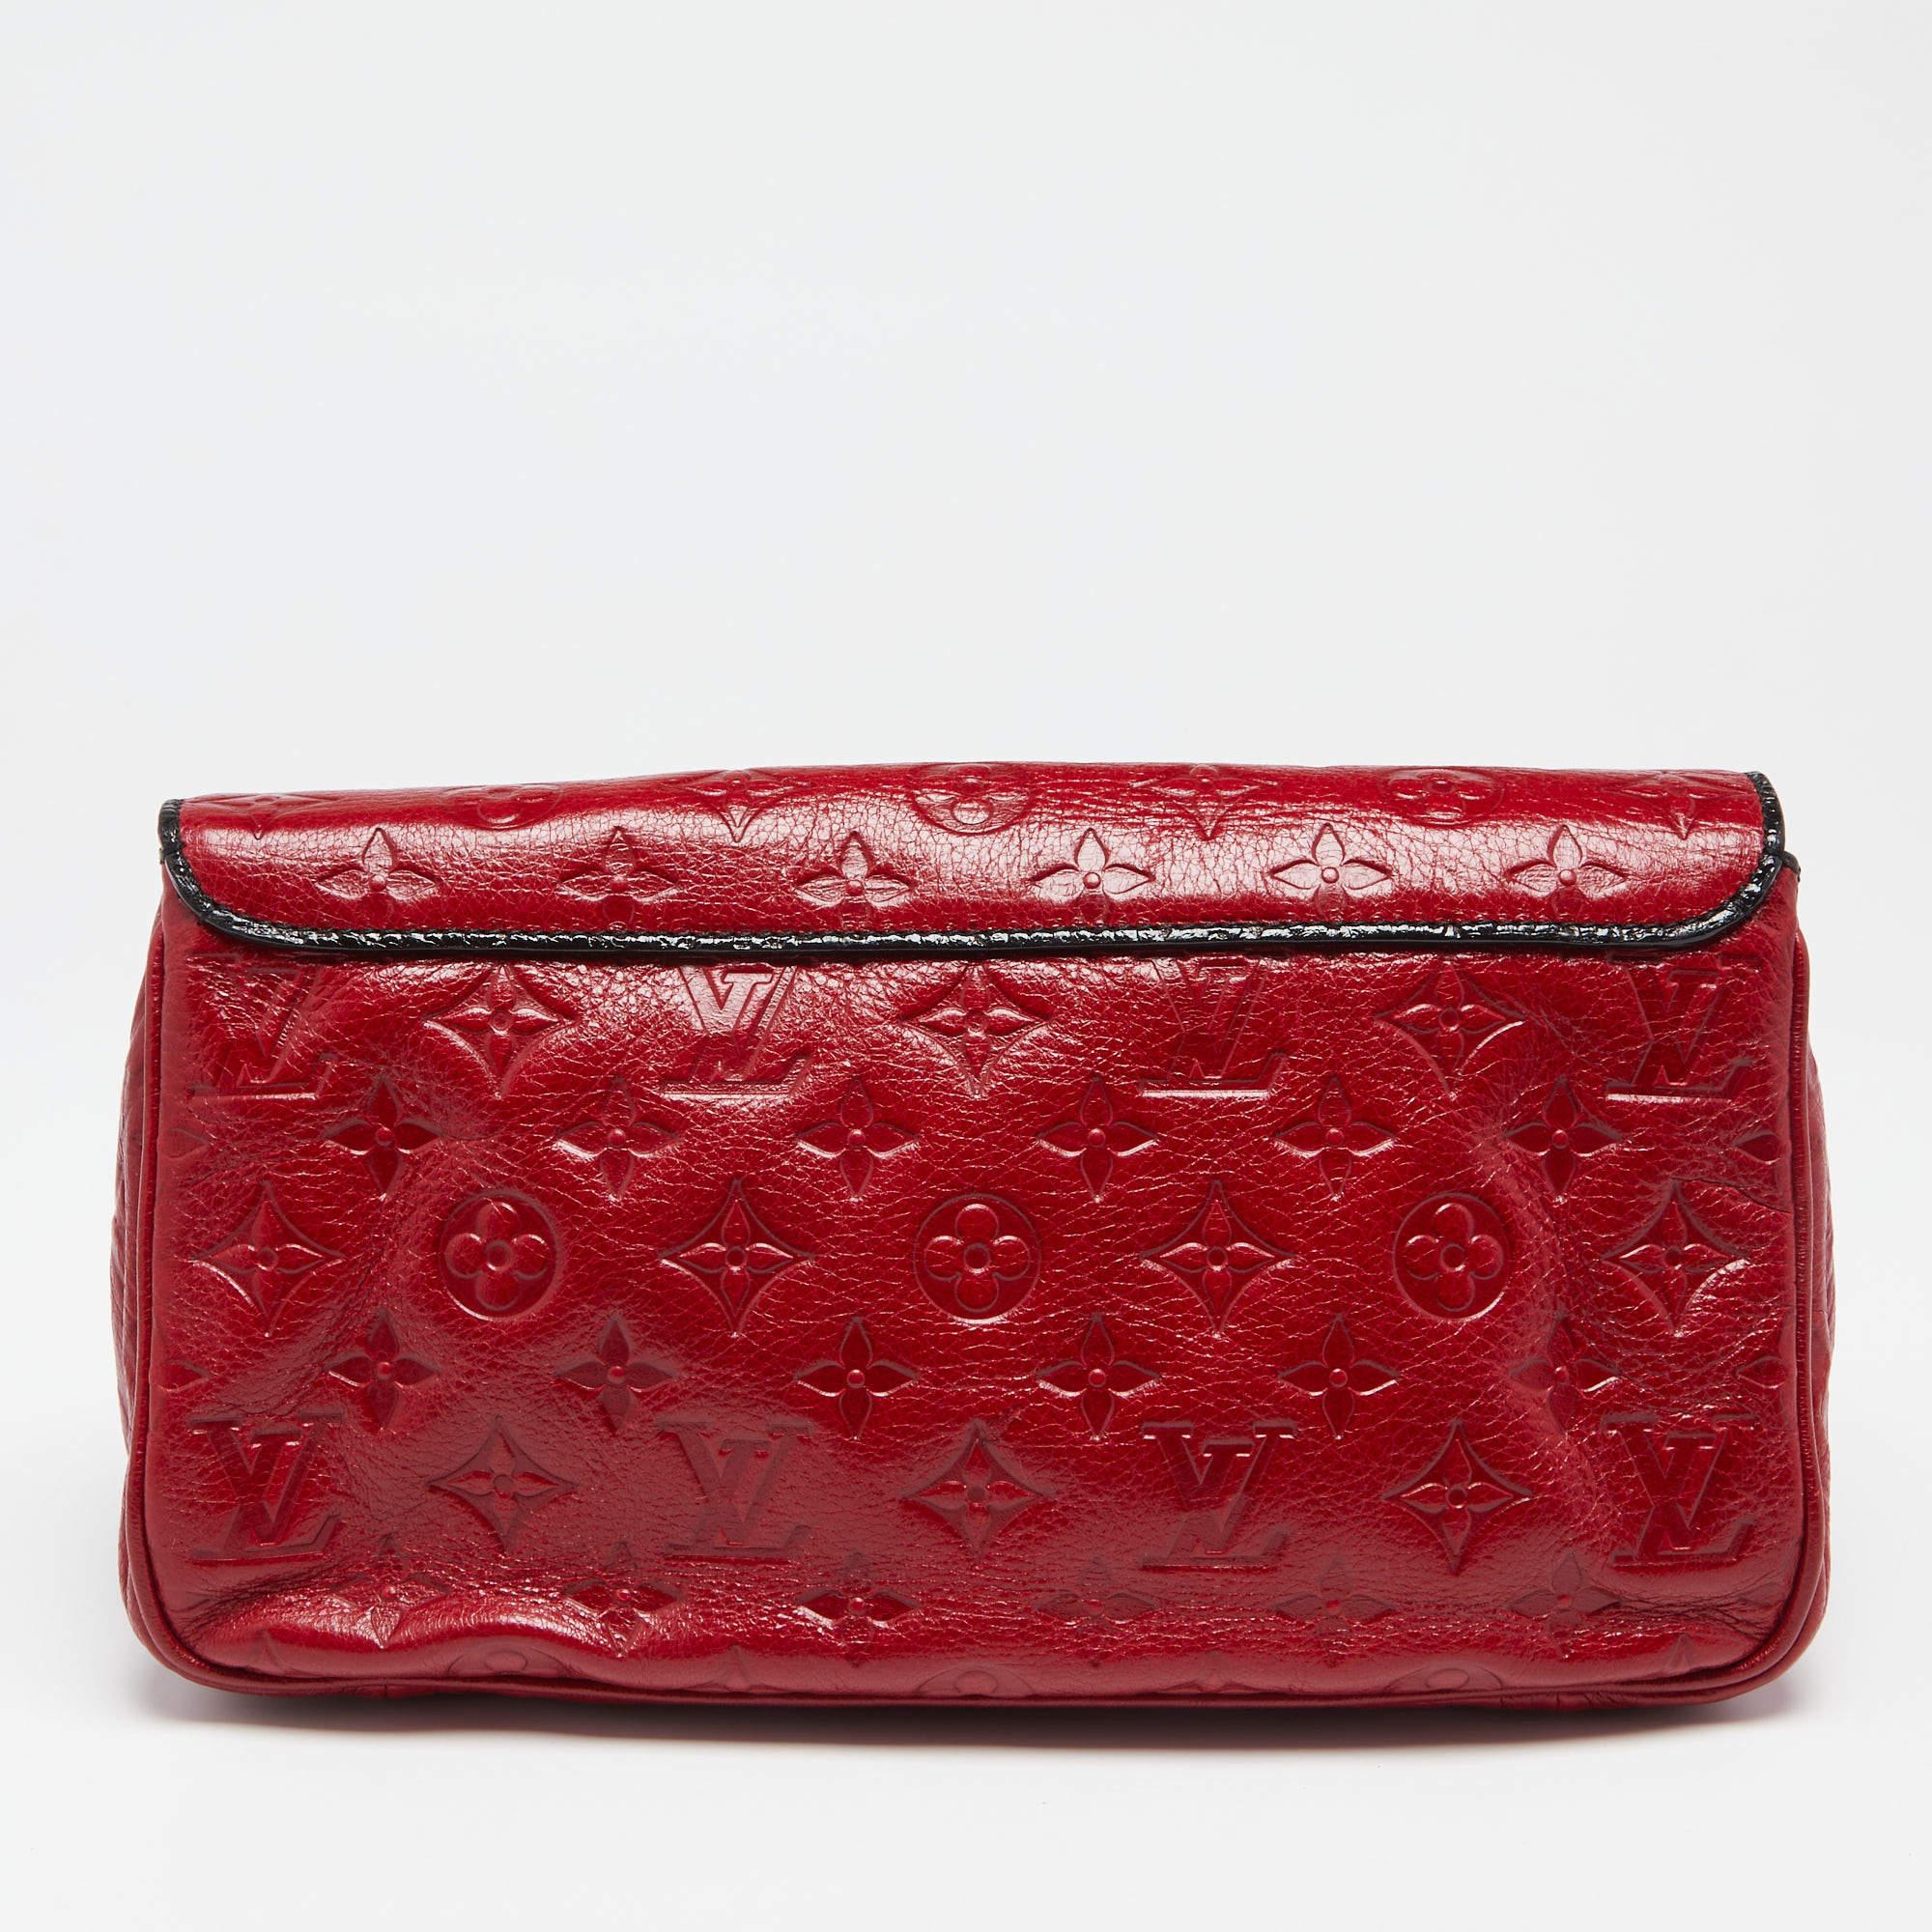 This My Deer Enigme clutch from Louis Vuitton is a stylish creation that is exceptionally well-made. Crafted from red Monogram glossy leather, this clutch is embellished beautifully with gold-toned hardware. It unveils a leather-satin interior,